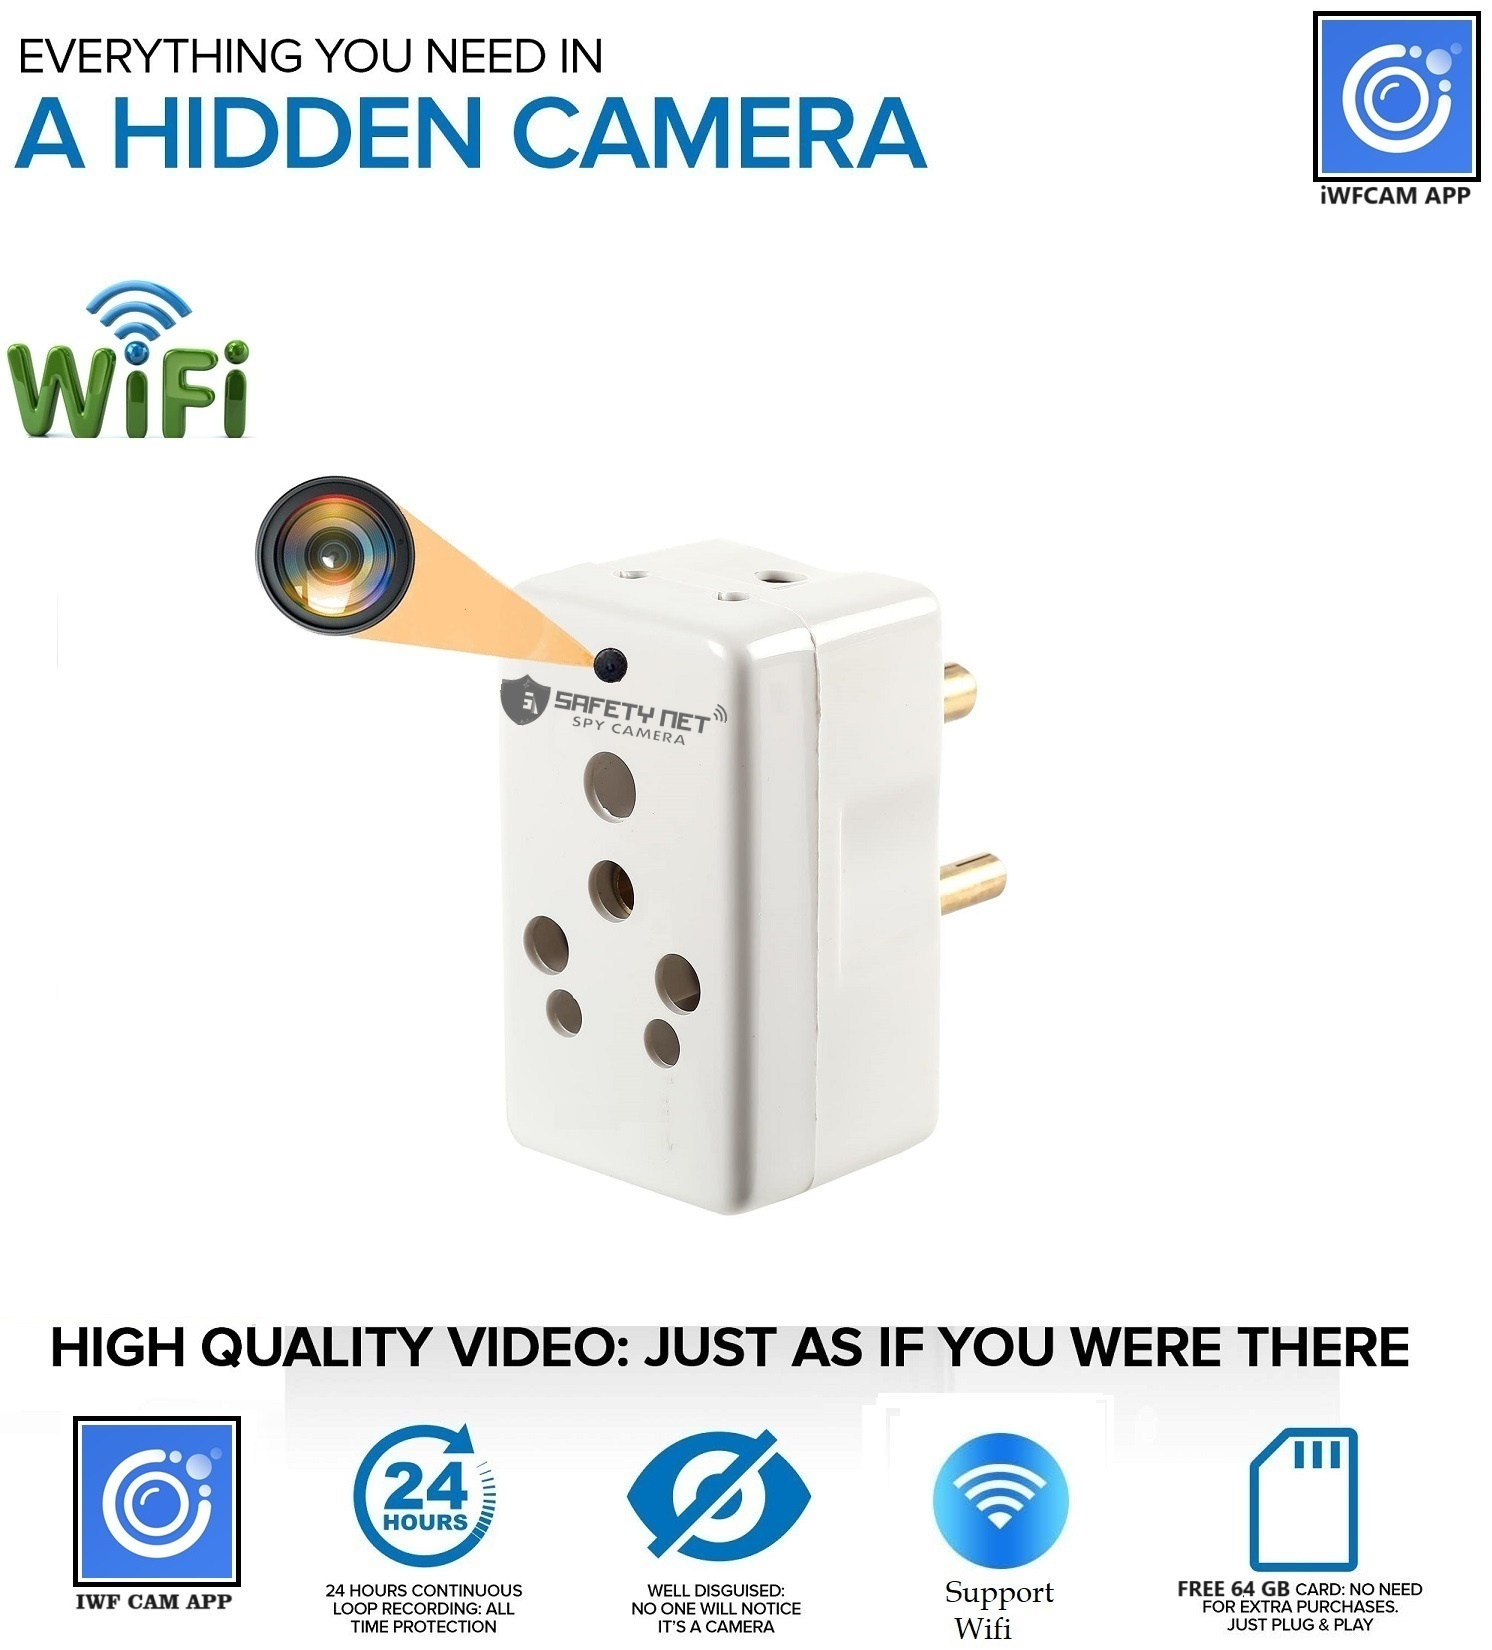 SAFETYNET Hidden Spy Camera WiFi Multi Plug - Hidden Camera with Live Feed WiFi - Indoor Hidden Security Camera - 1080P HD Hidden Nanny Cam - Motion Detection Spy Cam - with 32GB MicroSD Card